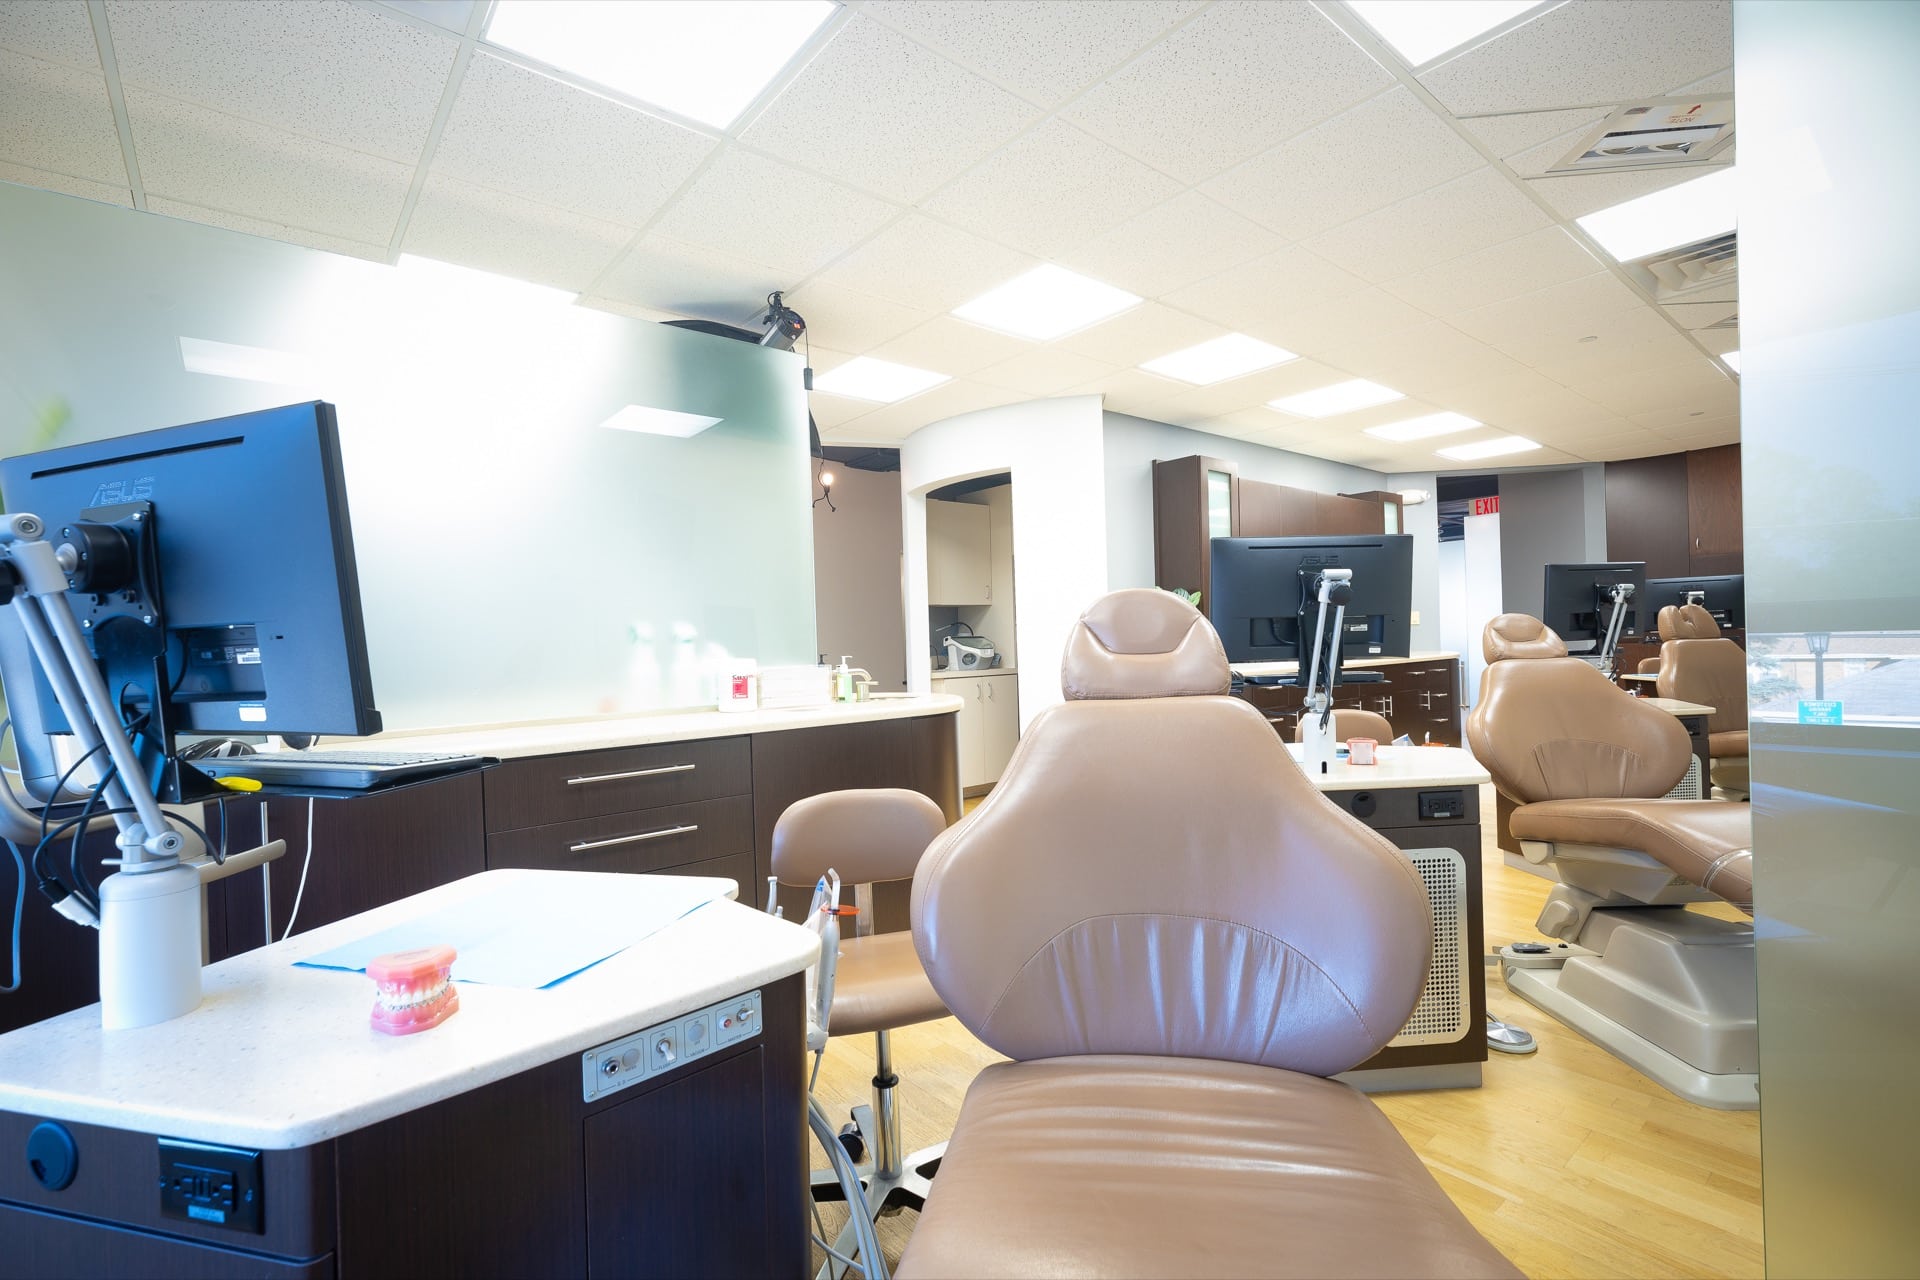 What’s the Difference Between a Dentist and an Orthodontist?